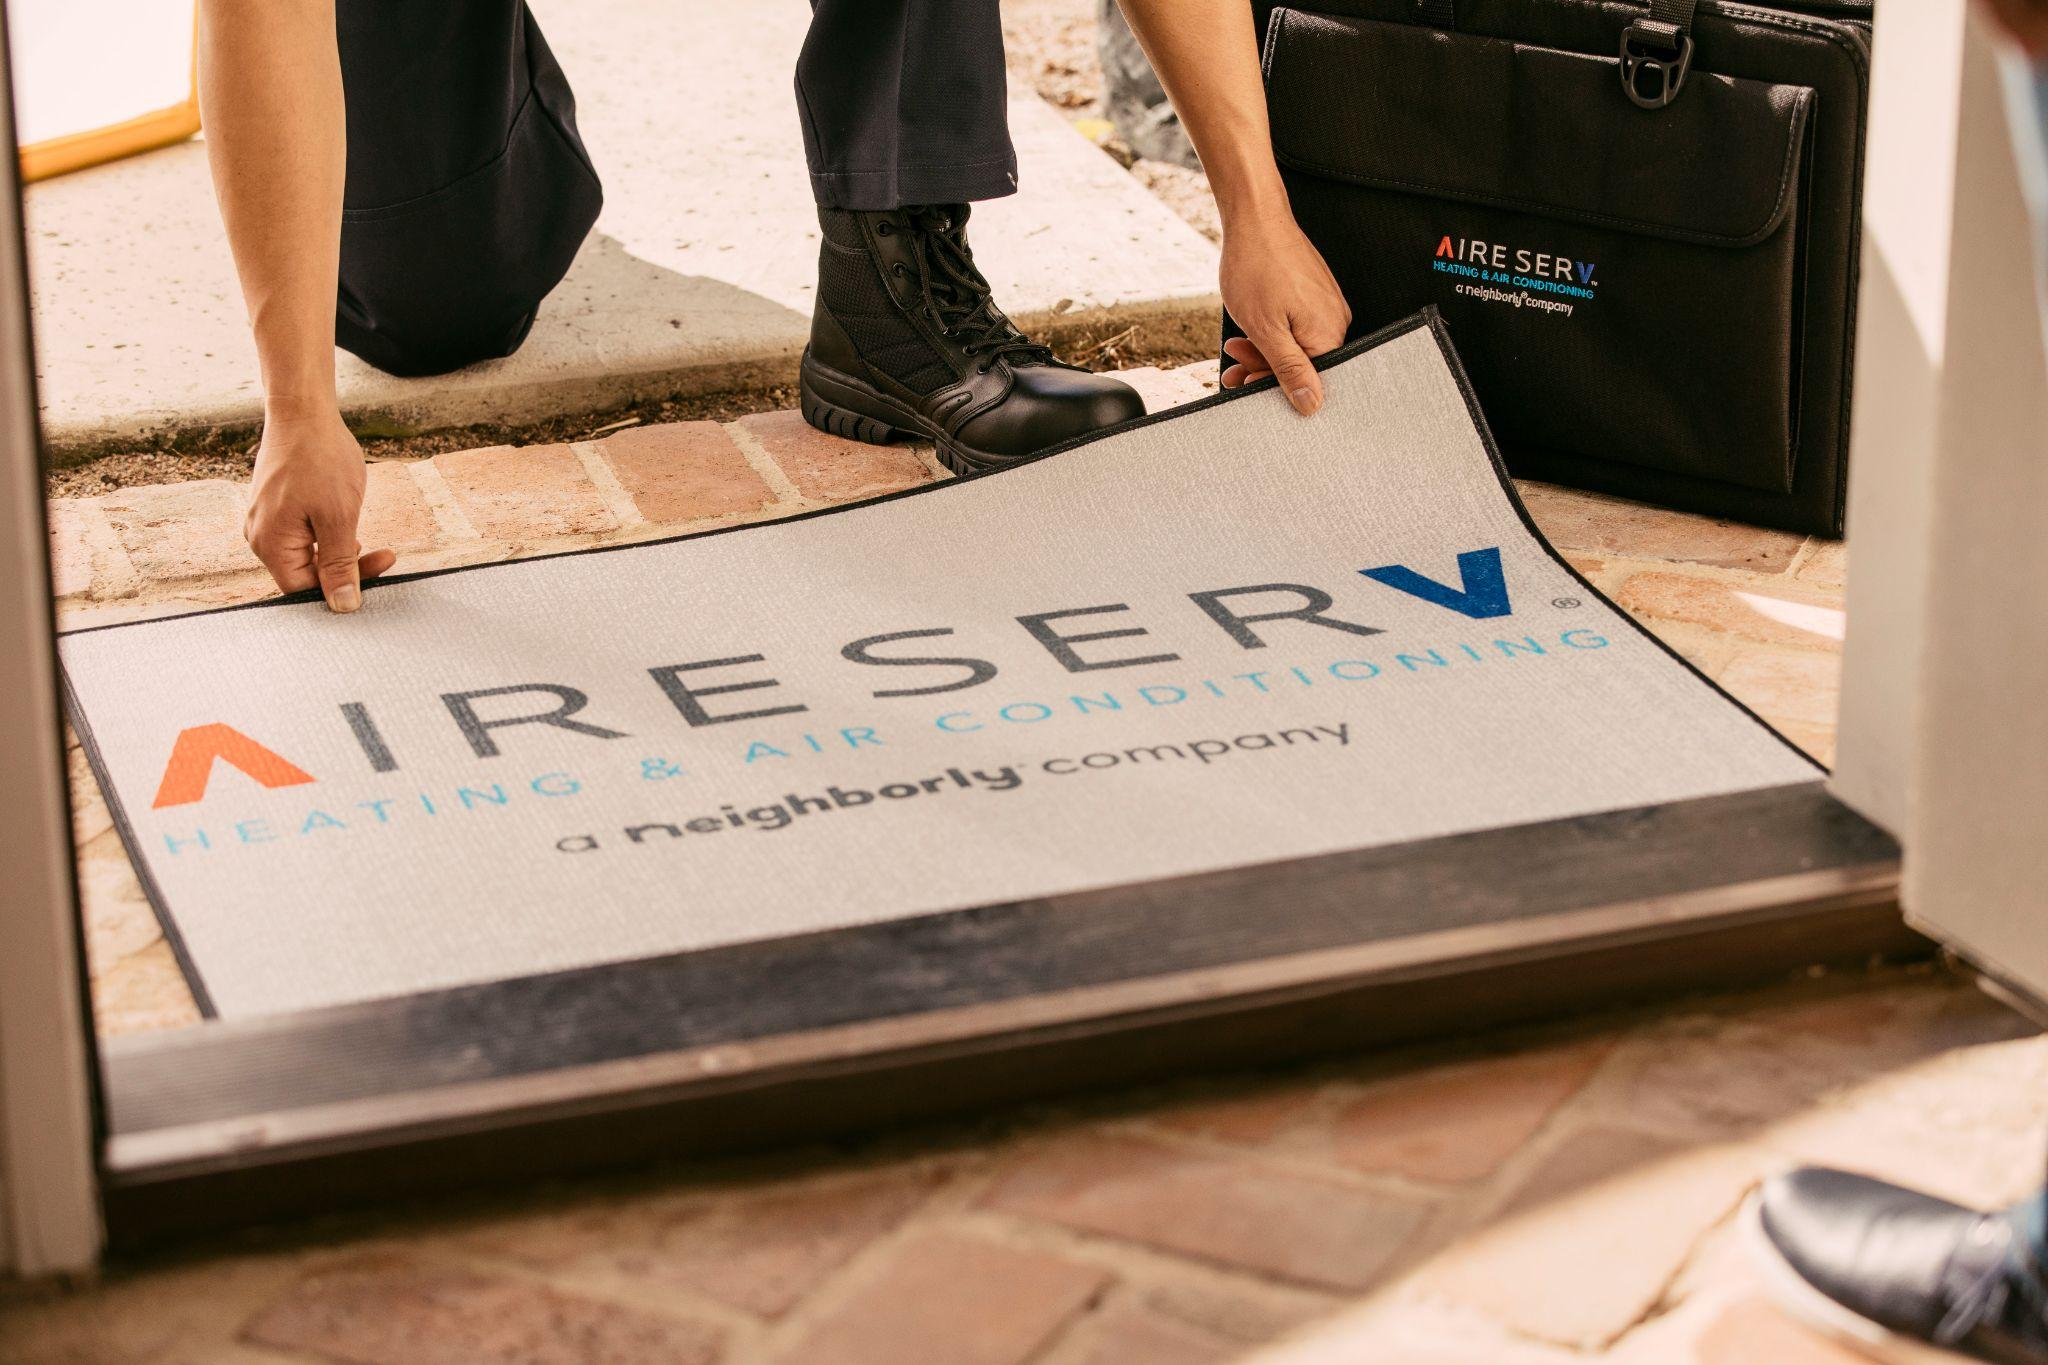 Aire Serv branded doormat being placed outside a home.